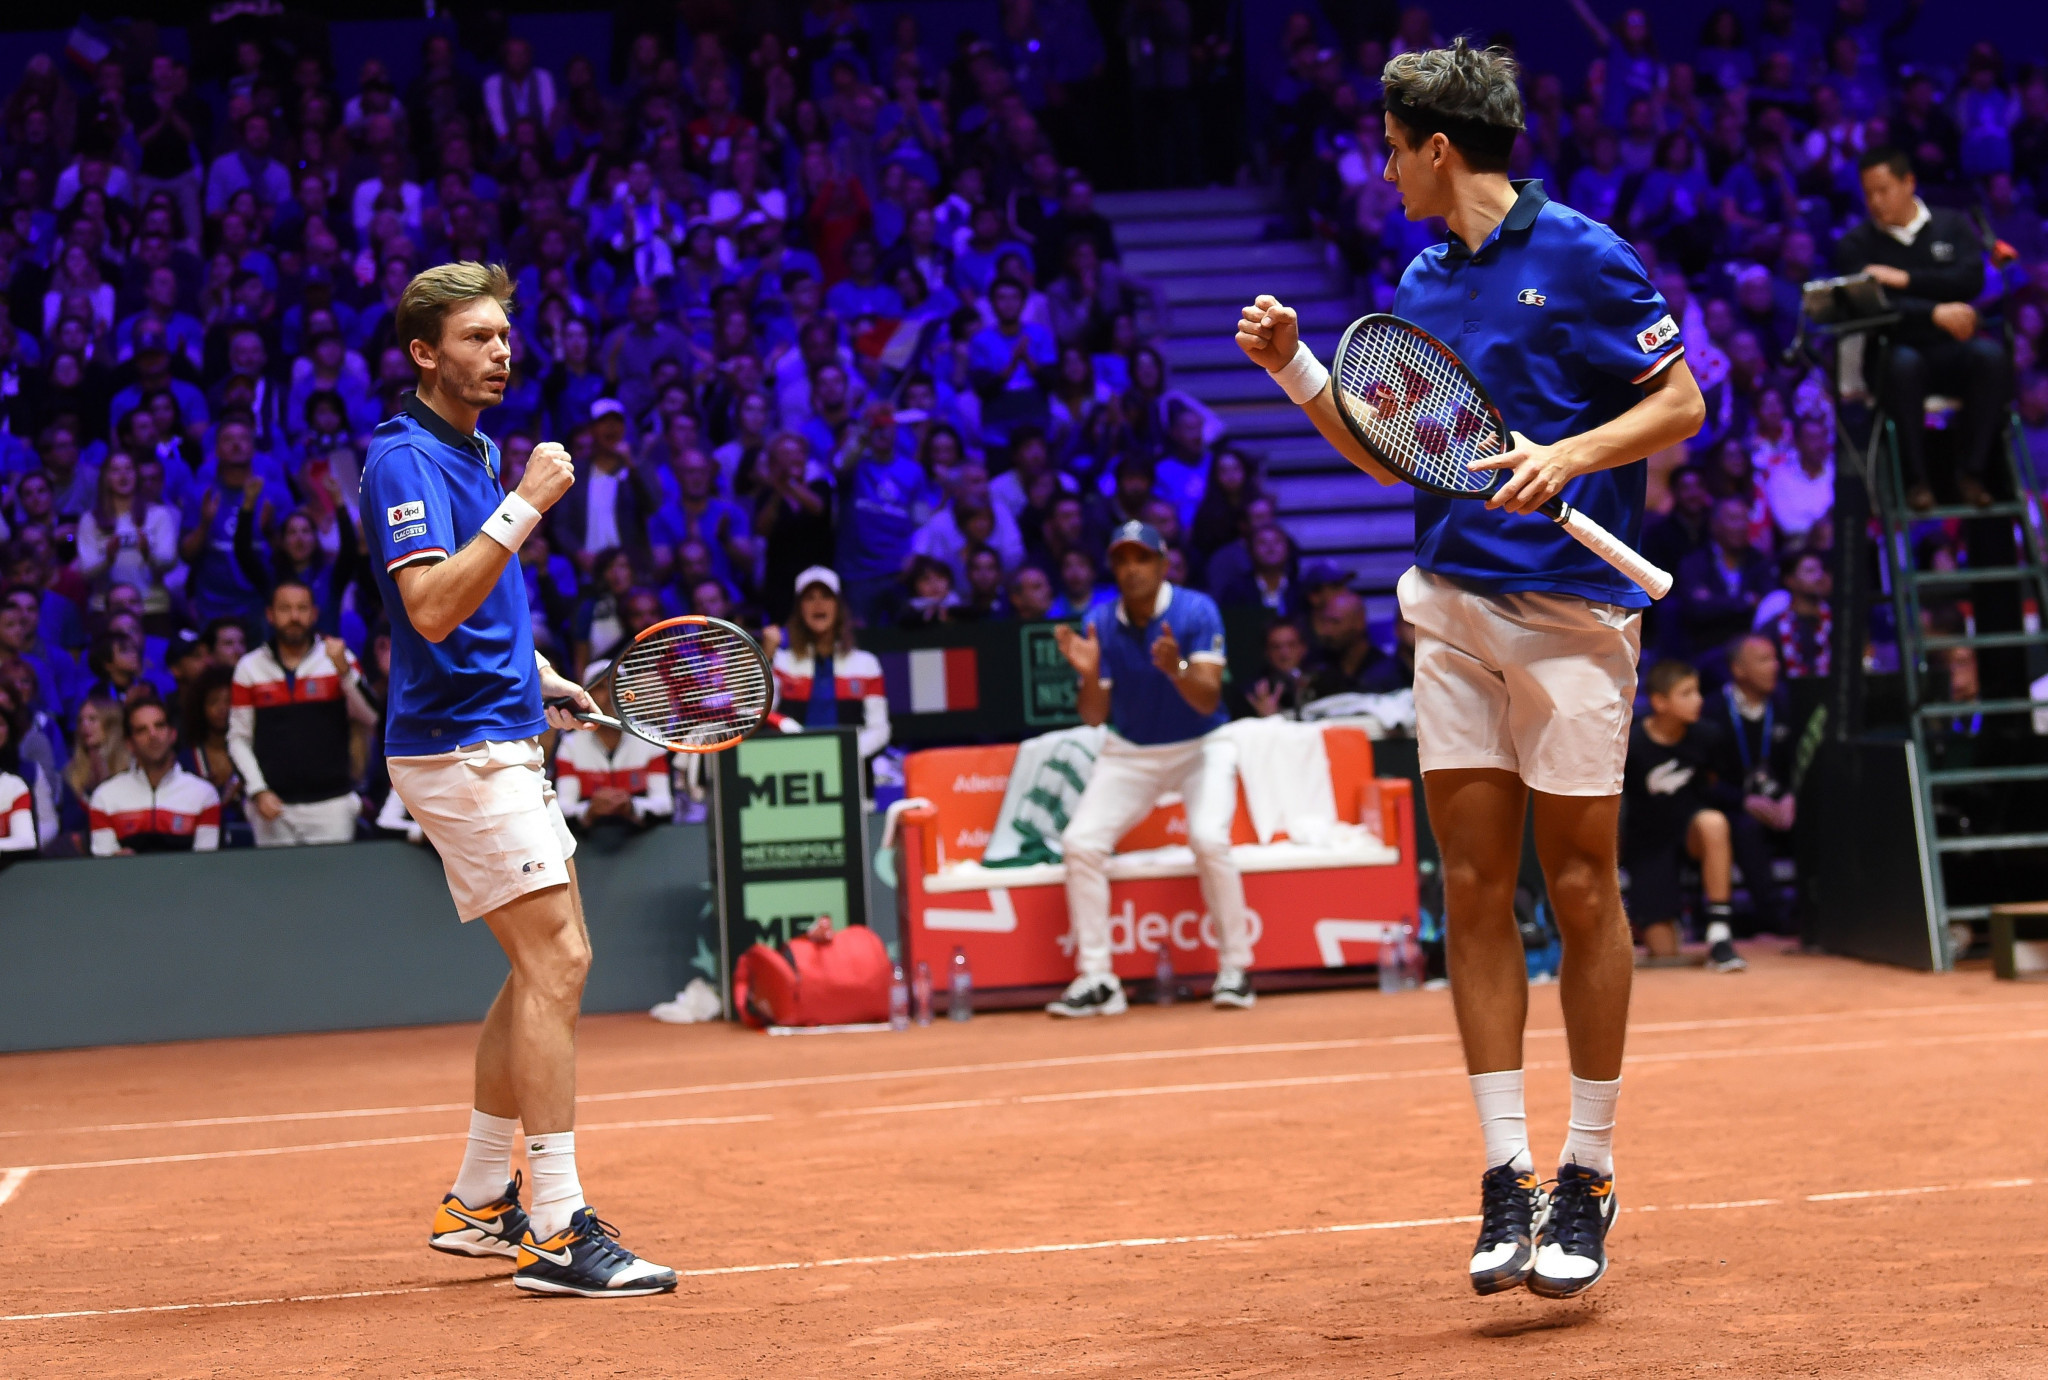 French duo claim vital doubles win to halve Croatia's lead at Davis Cup final